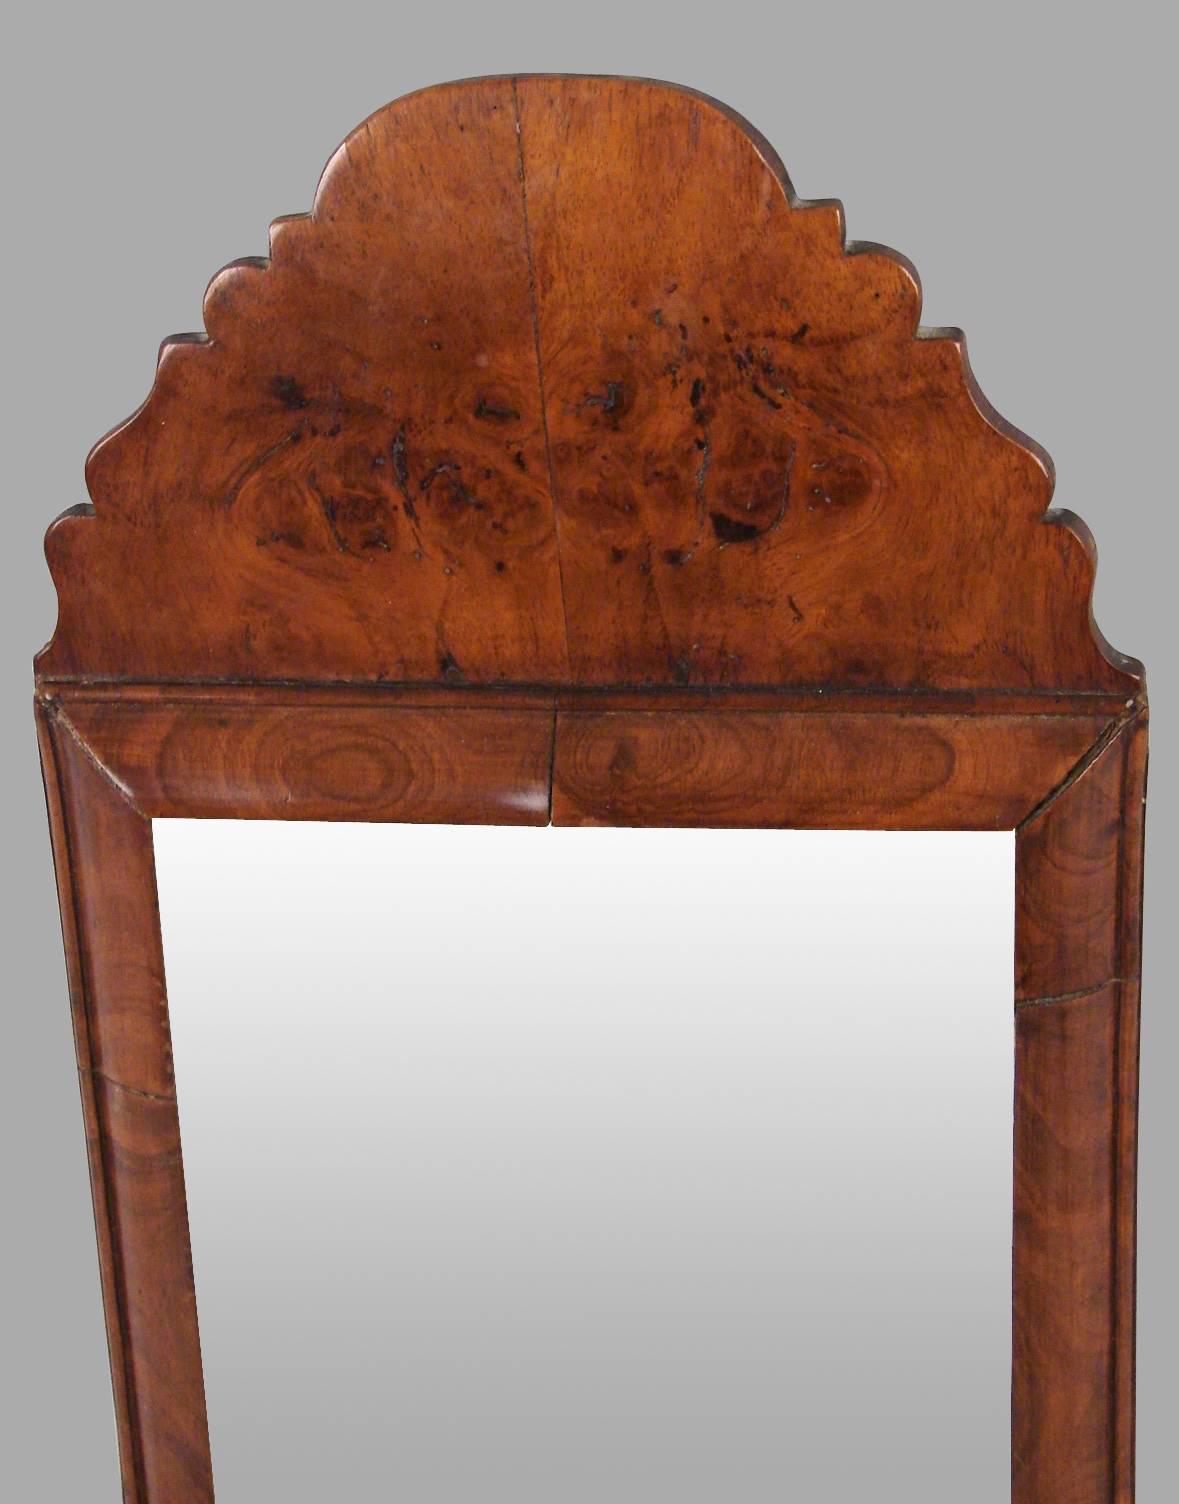 A charming English or Northern European burl walnut mirror of small size with a beveled plate, the shaped crest above a simple molded frame, circa 1750-1800.